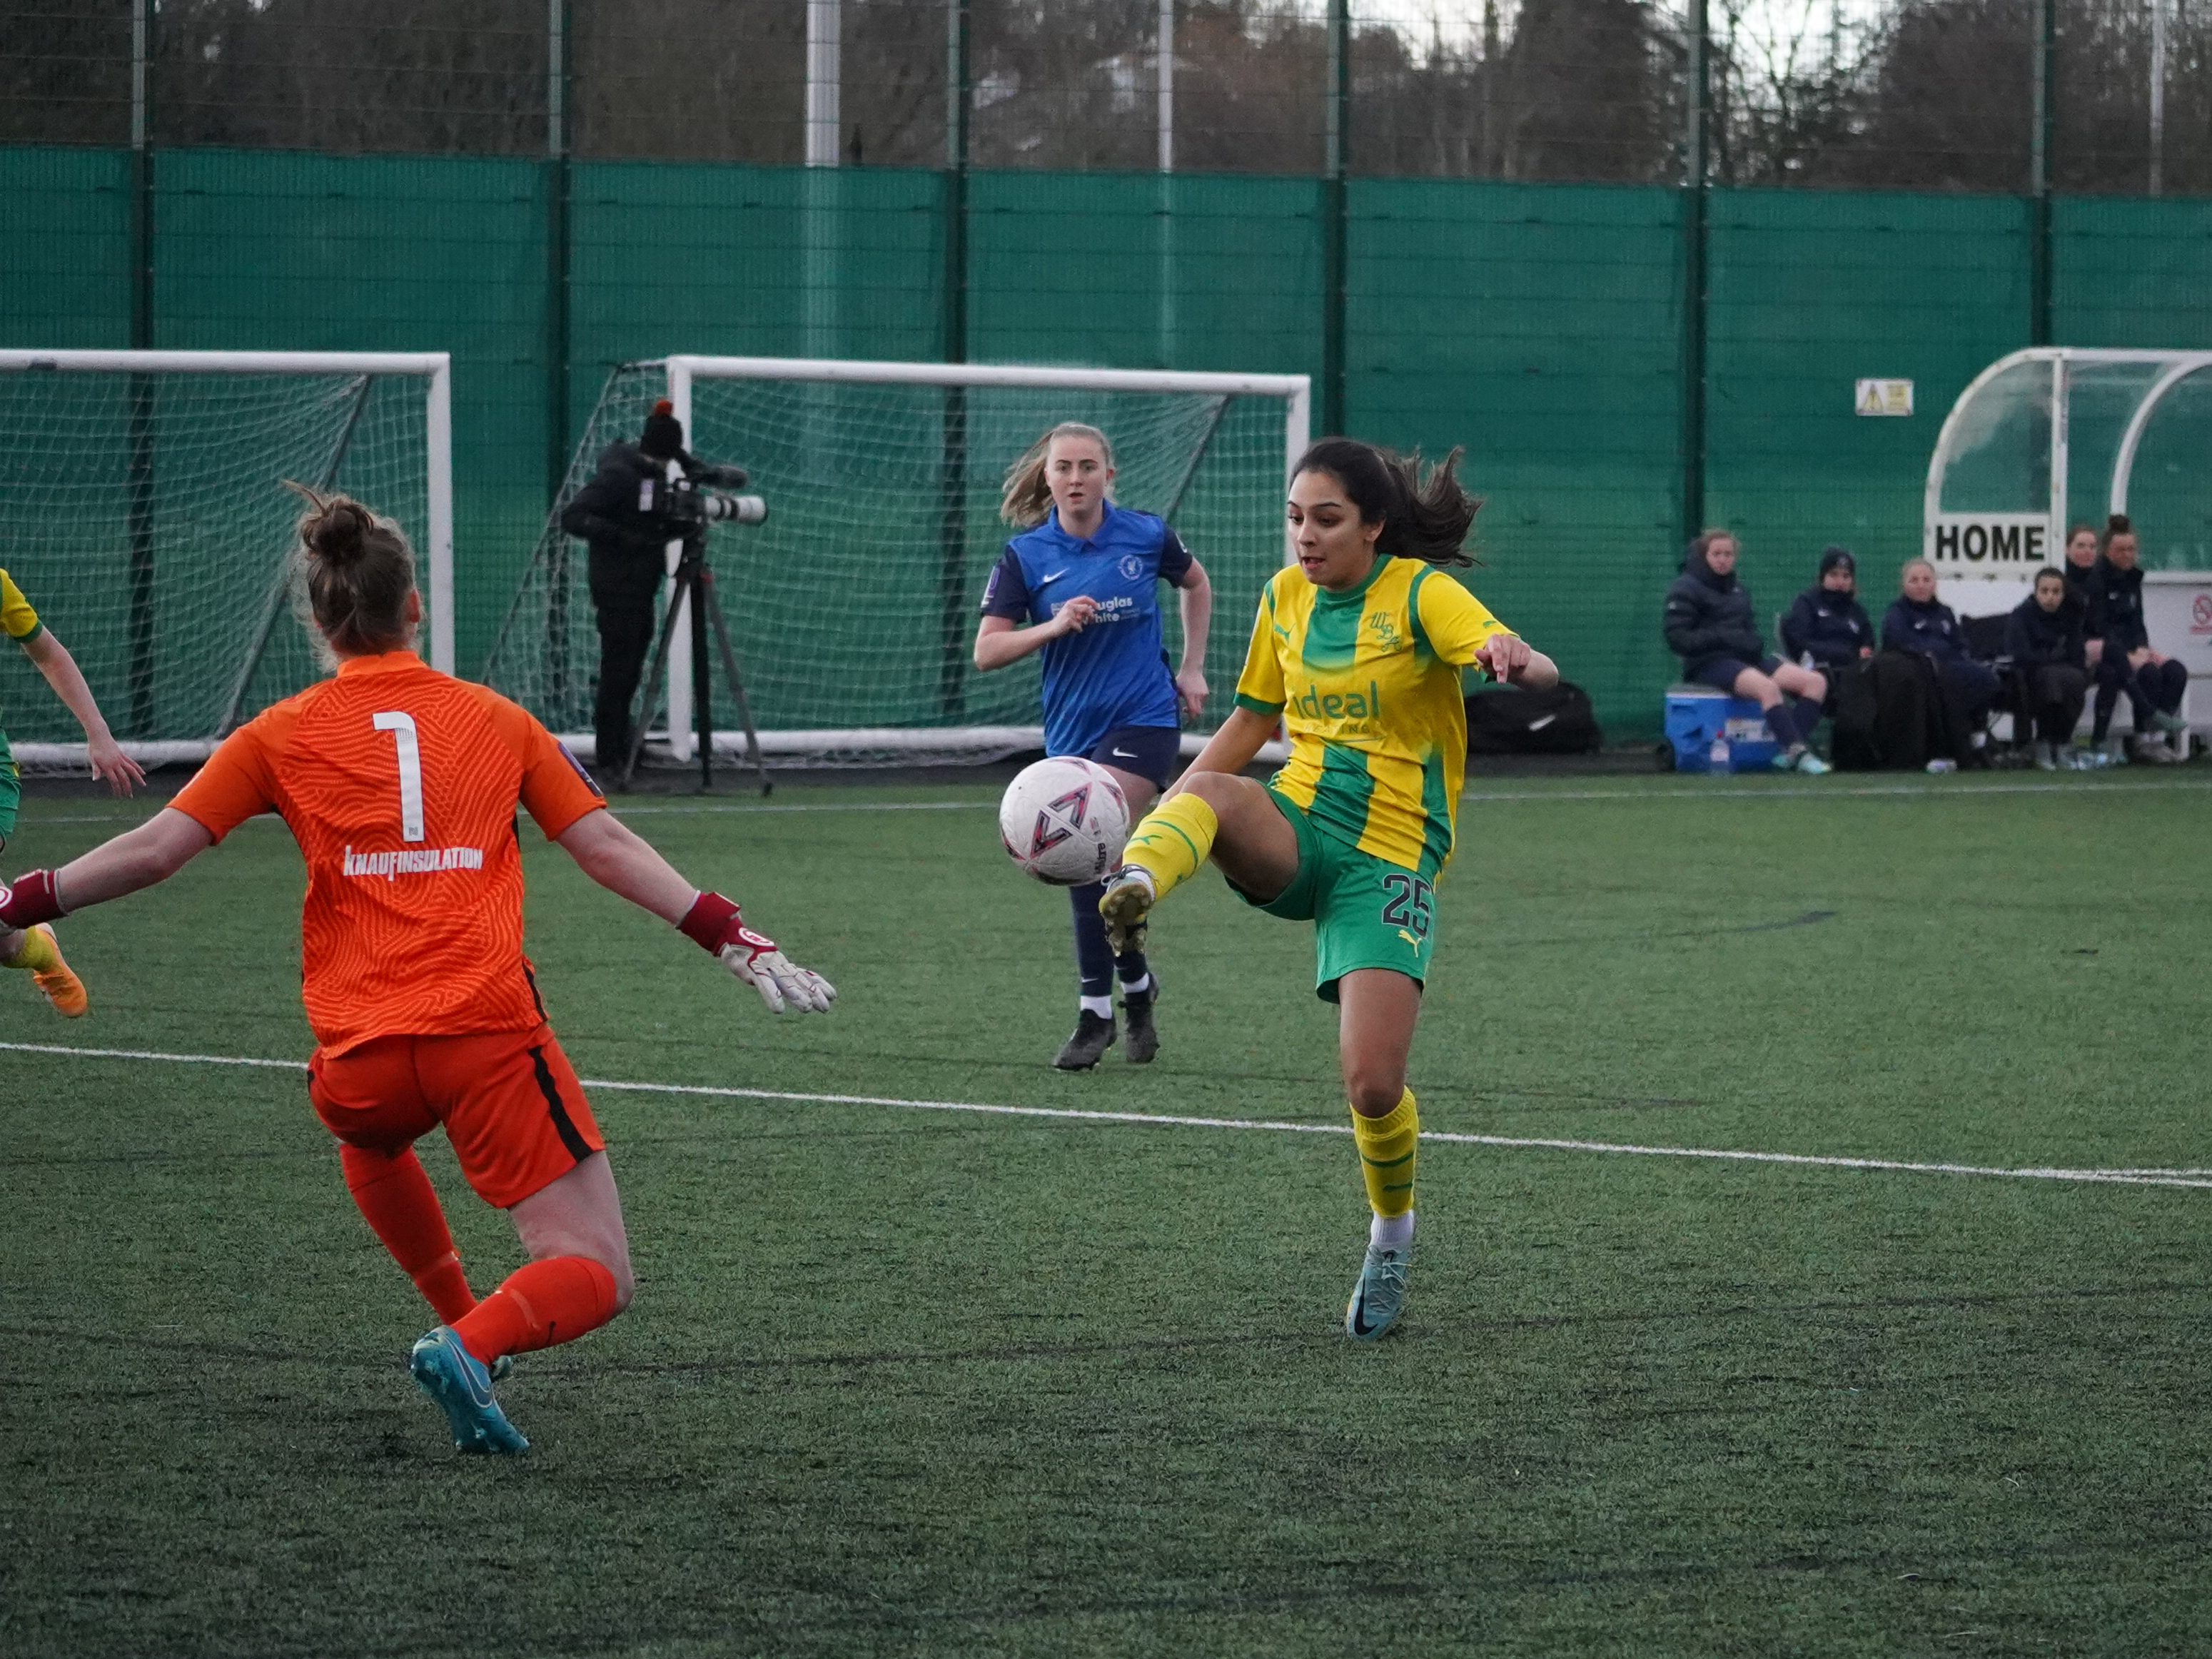 An image of Mariam Mahmood scoring against Liverpool Feds in the FA Cup